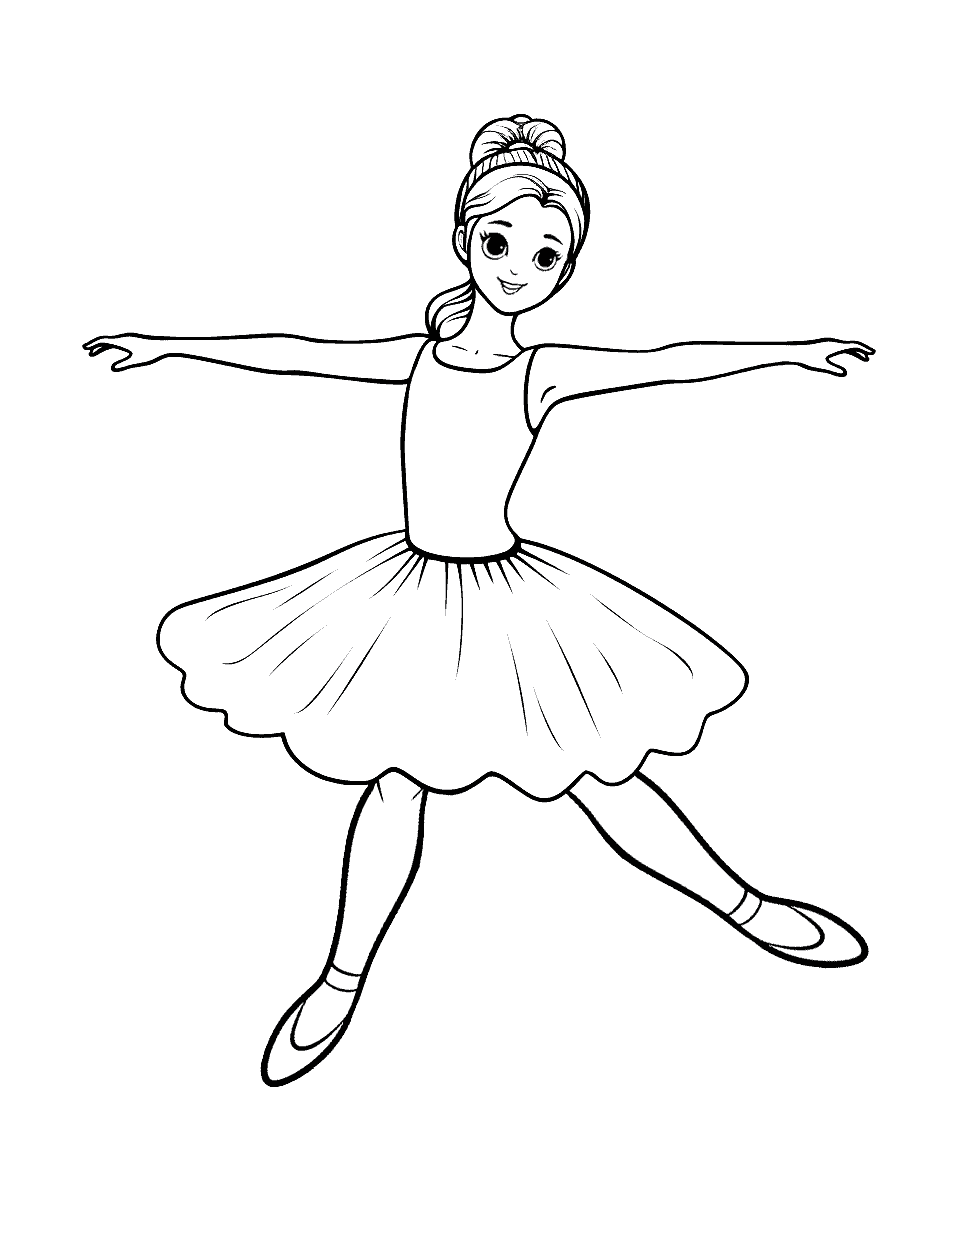 Leap Ballerina in Action Coloring Page - A ballerina captured in mid-leap, showing motion and grace.